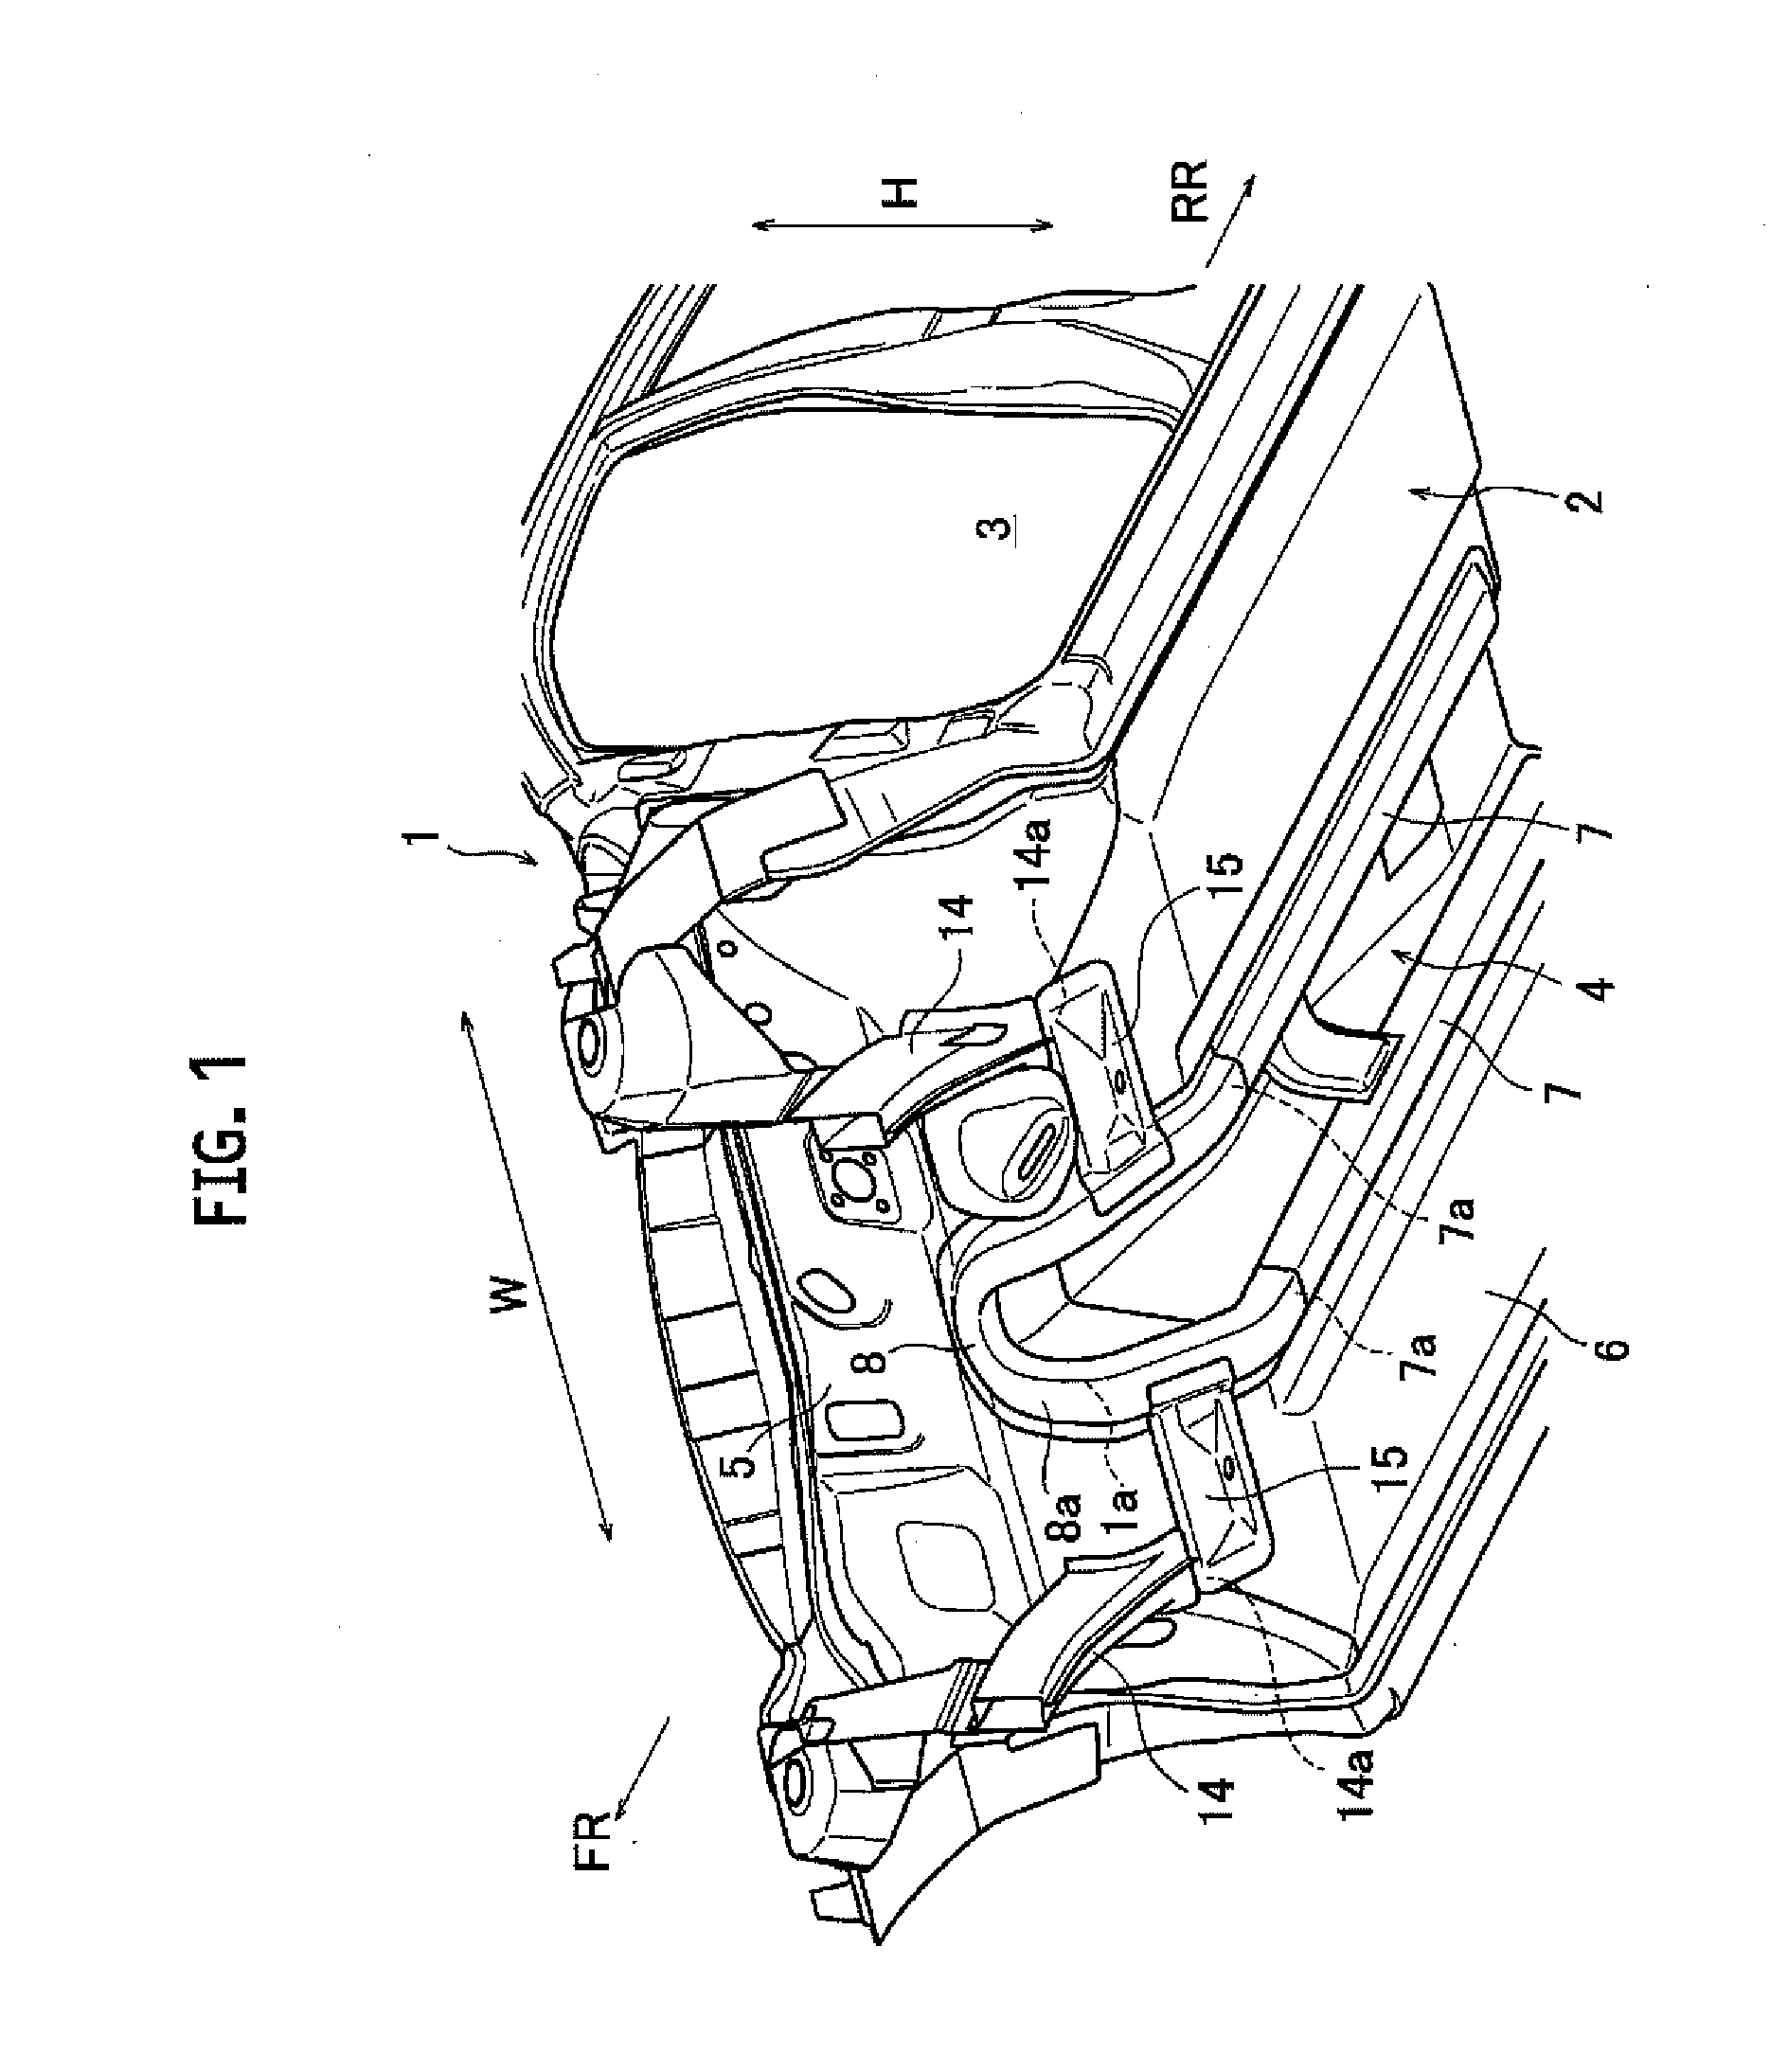 Vehicle body front section structure